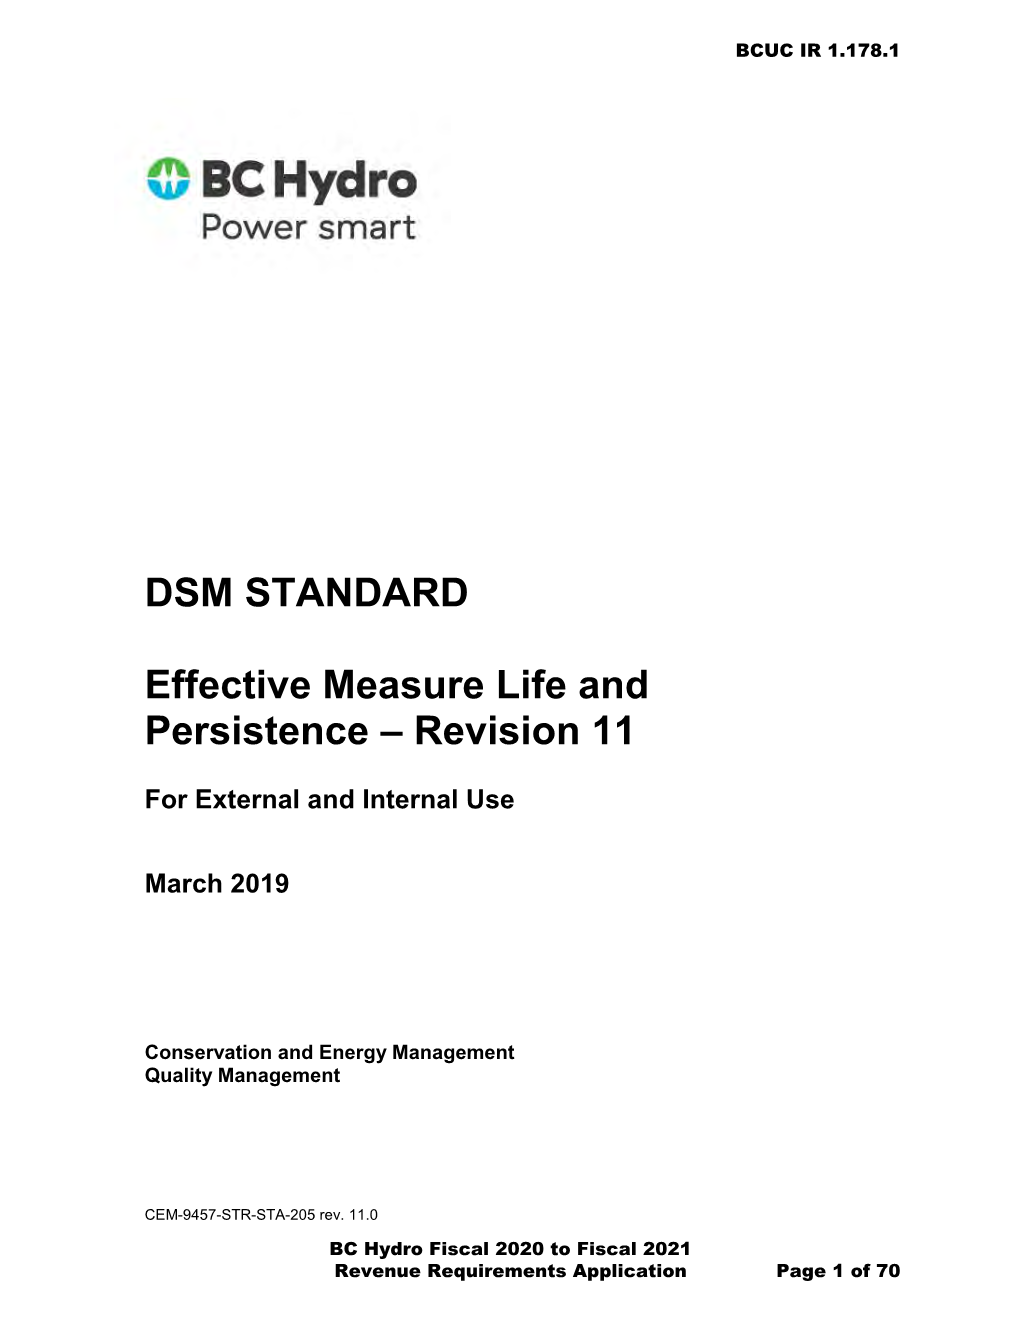 DSM STANDARD Effective Measure Life and Persistence